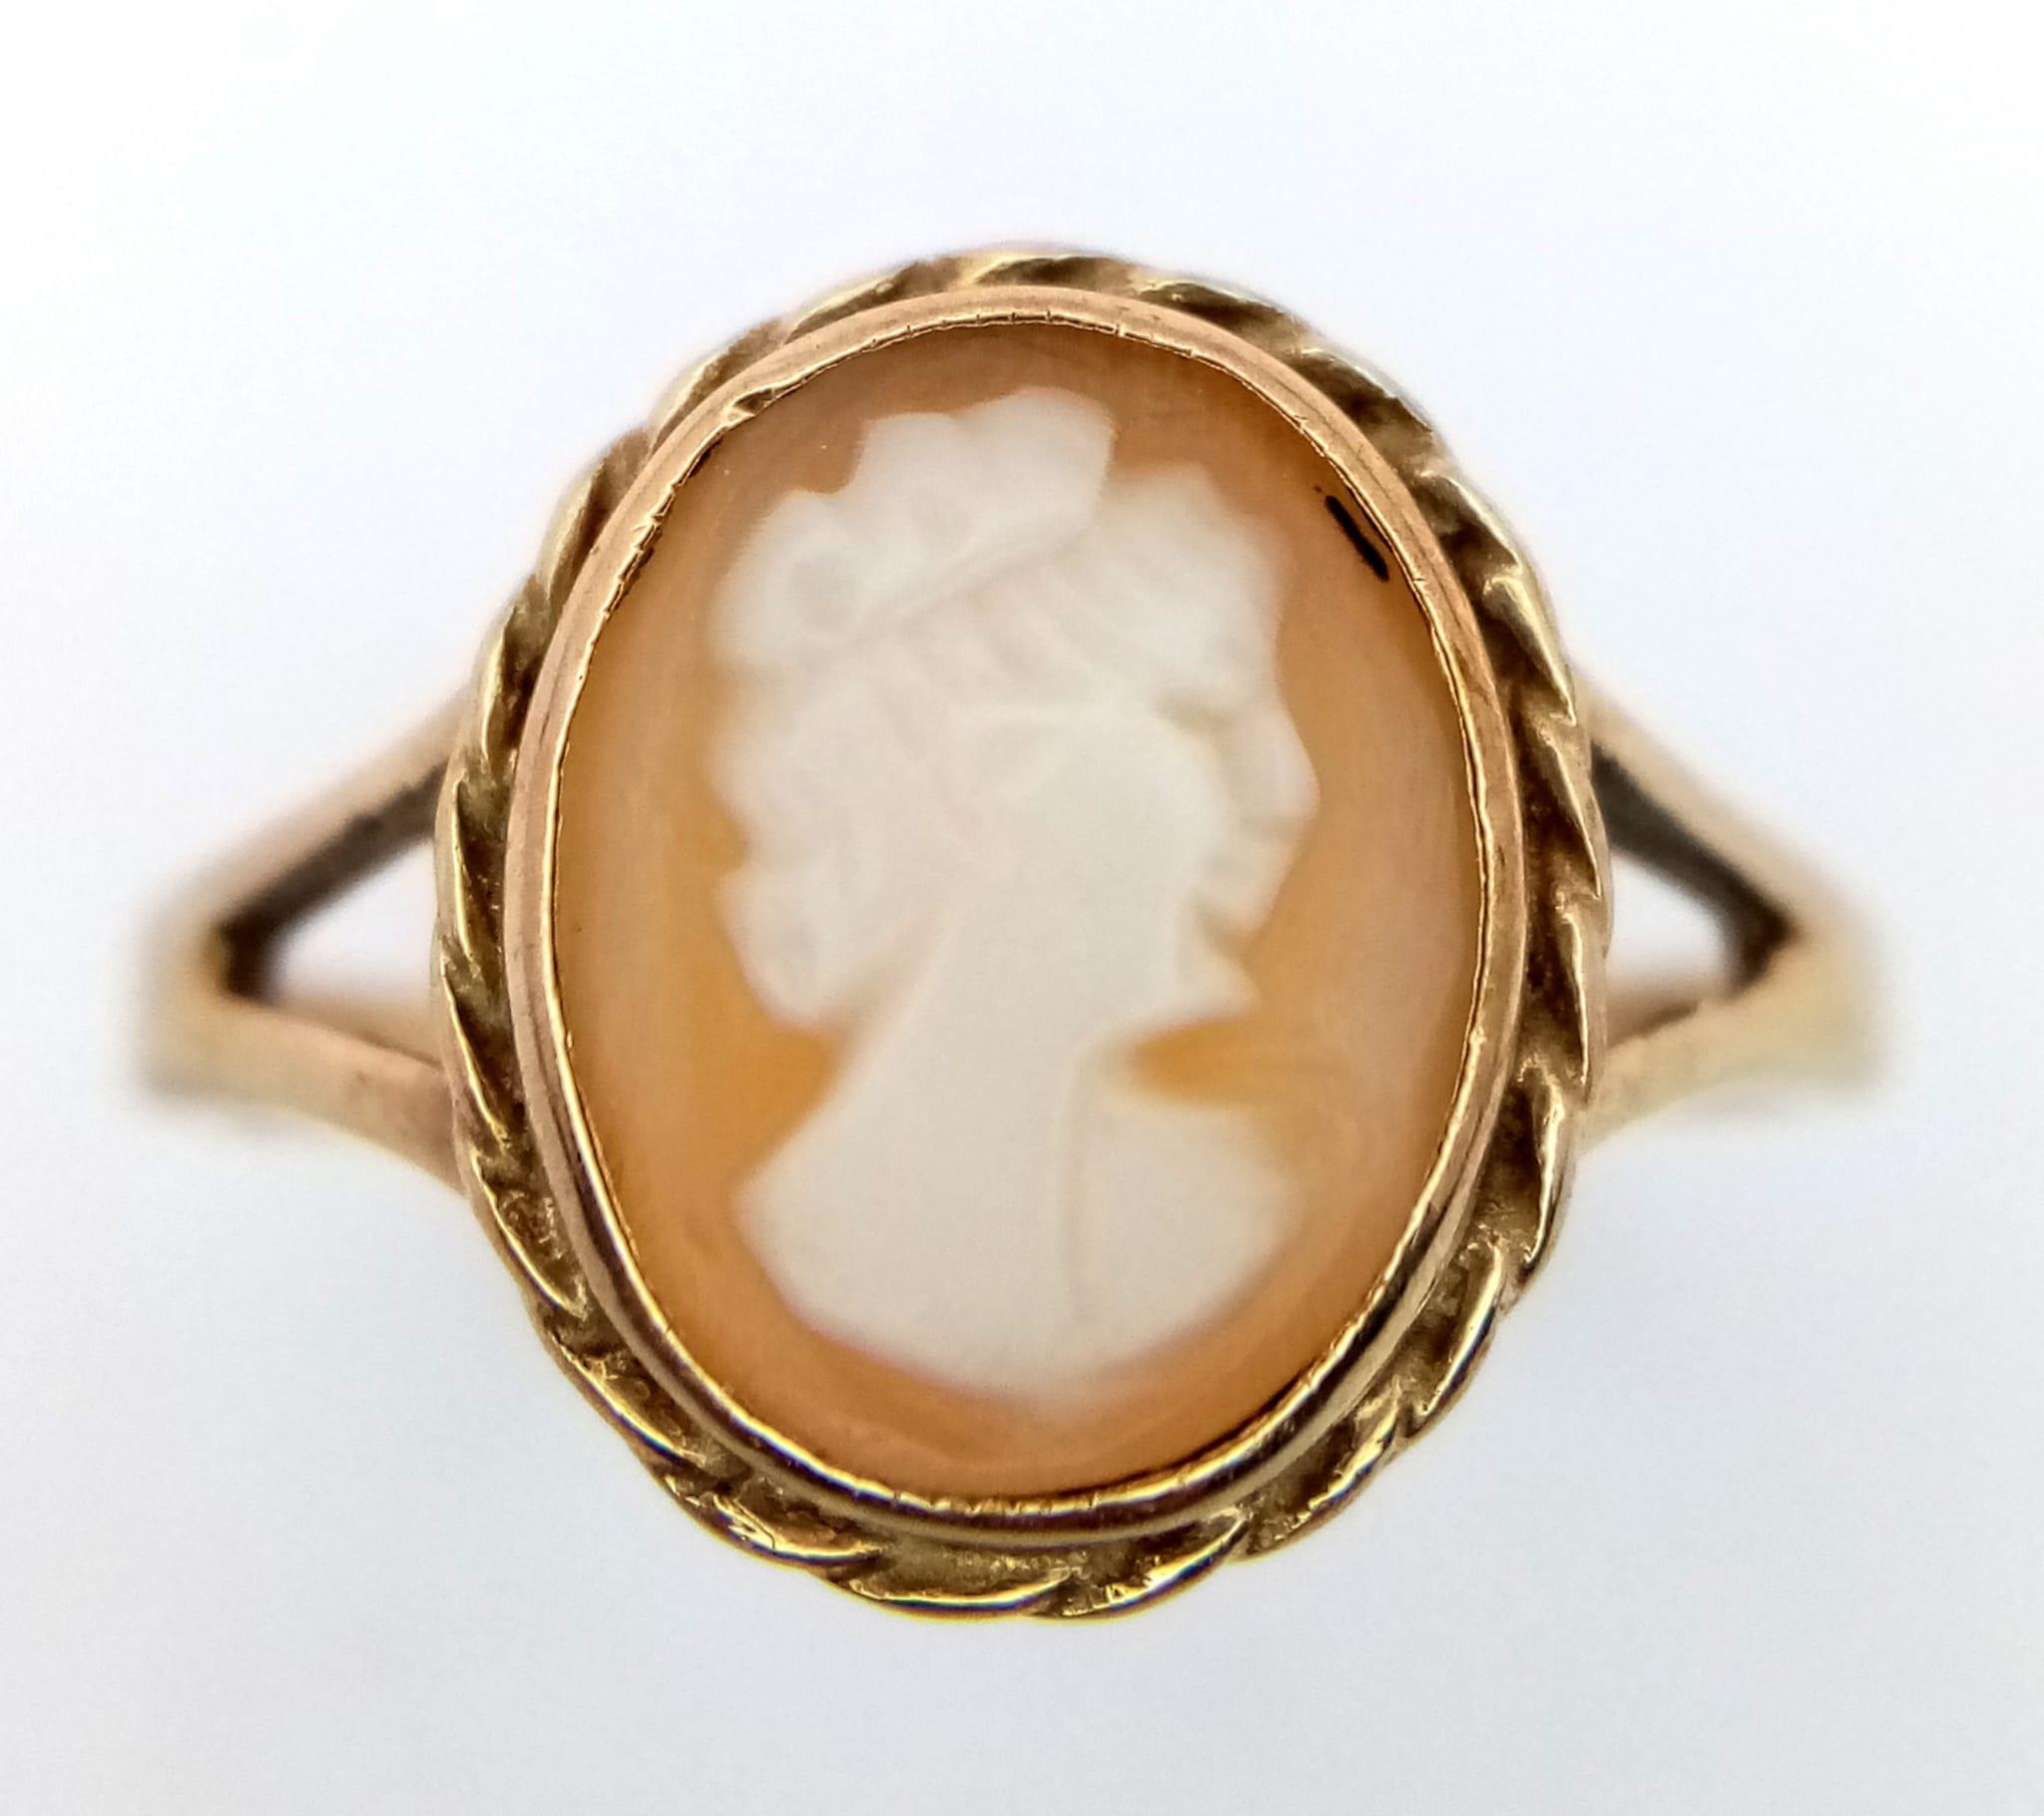 A Vintage 9K Yellow Gold Cameo Ring. Size M. 2g total weight. - Image 2 of 5